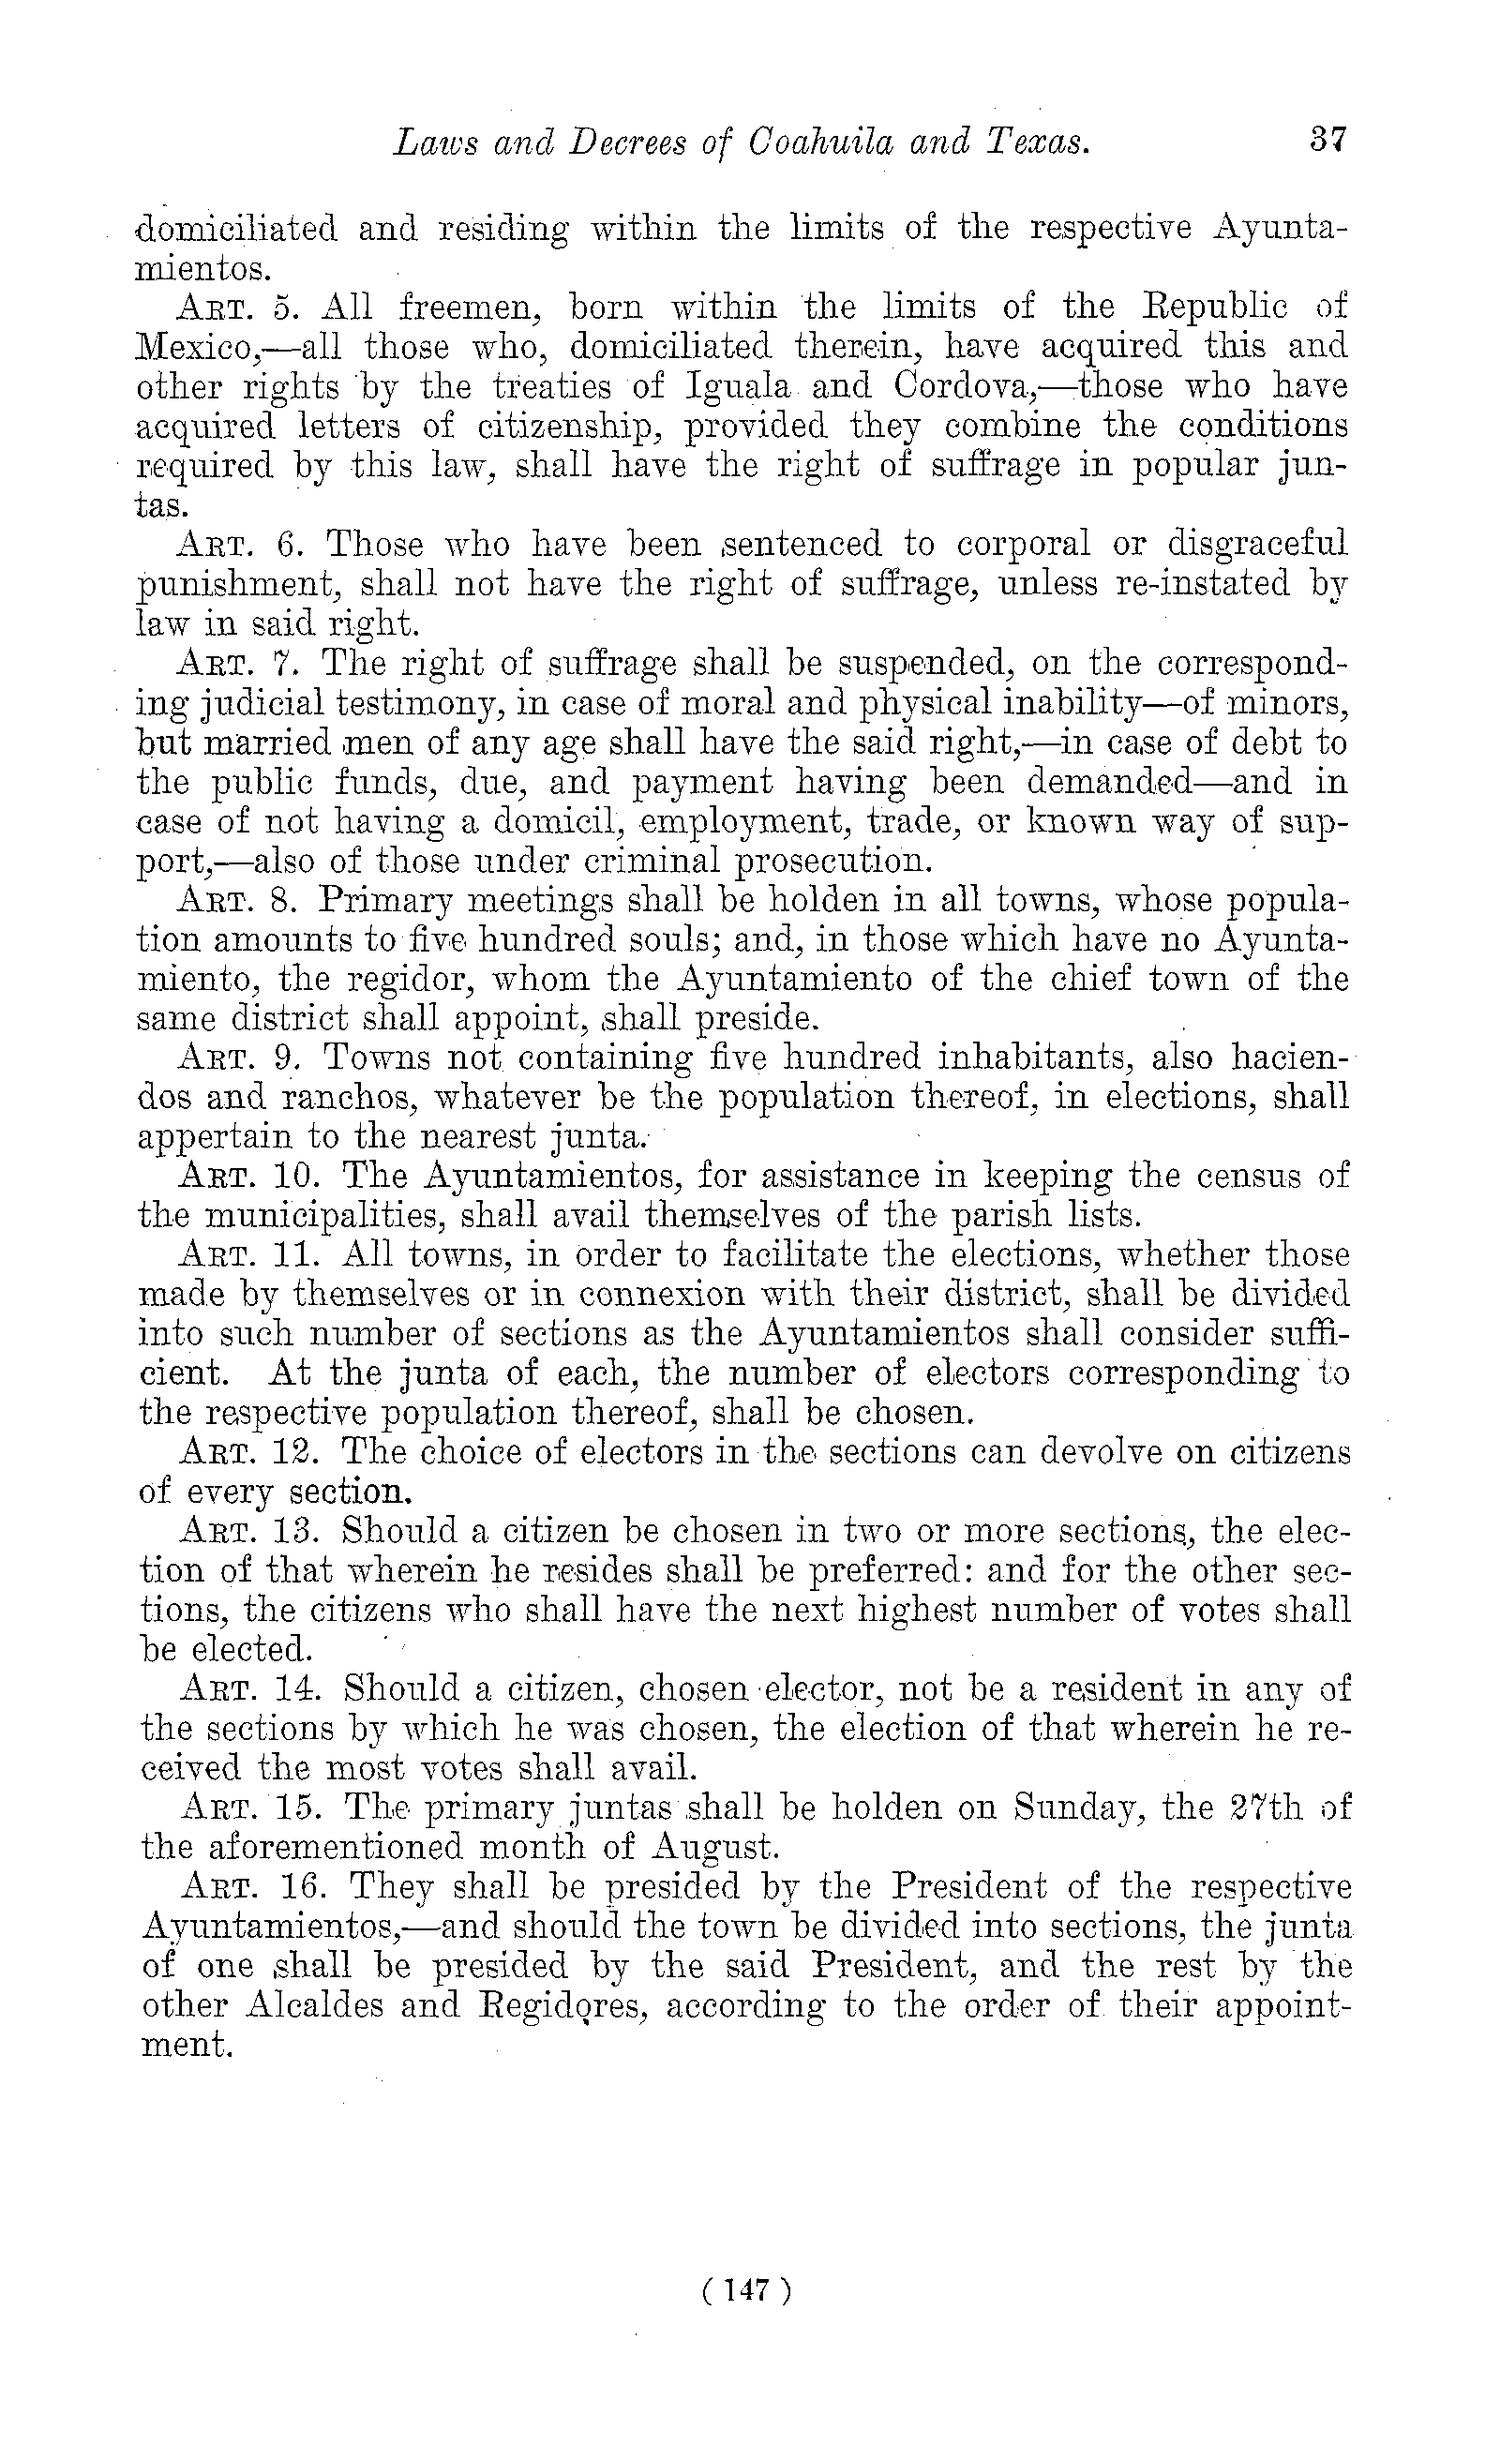 The Laws of Texas, 1822-1897 Volume 1
                                                
                                                    147
                                                